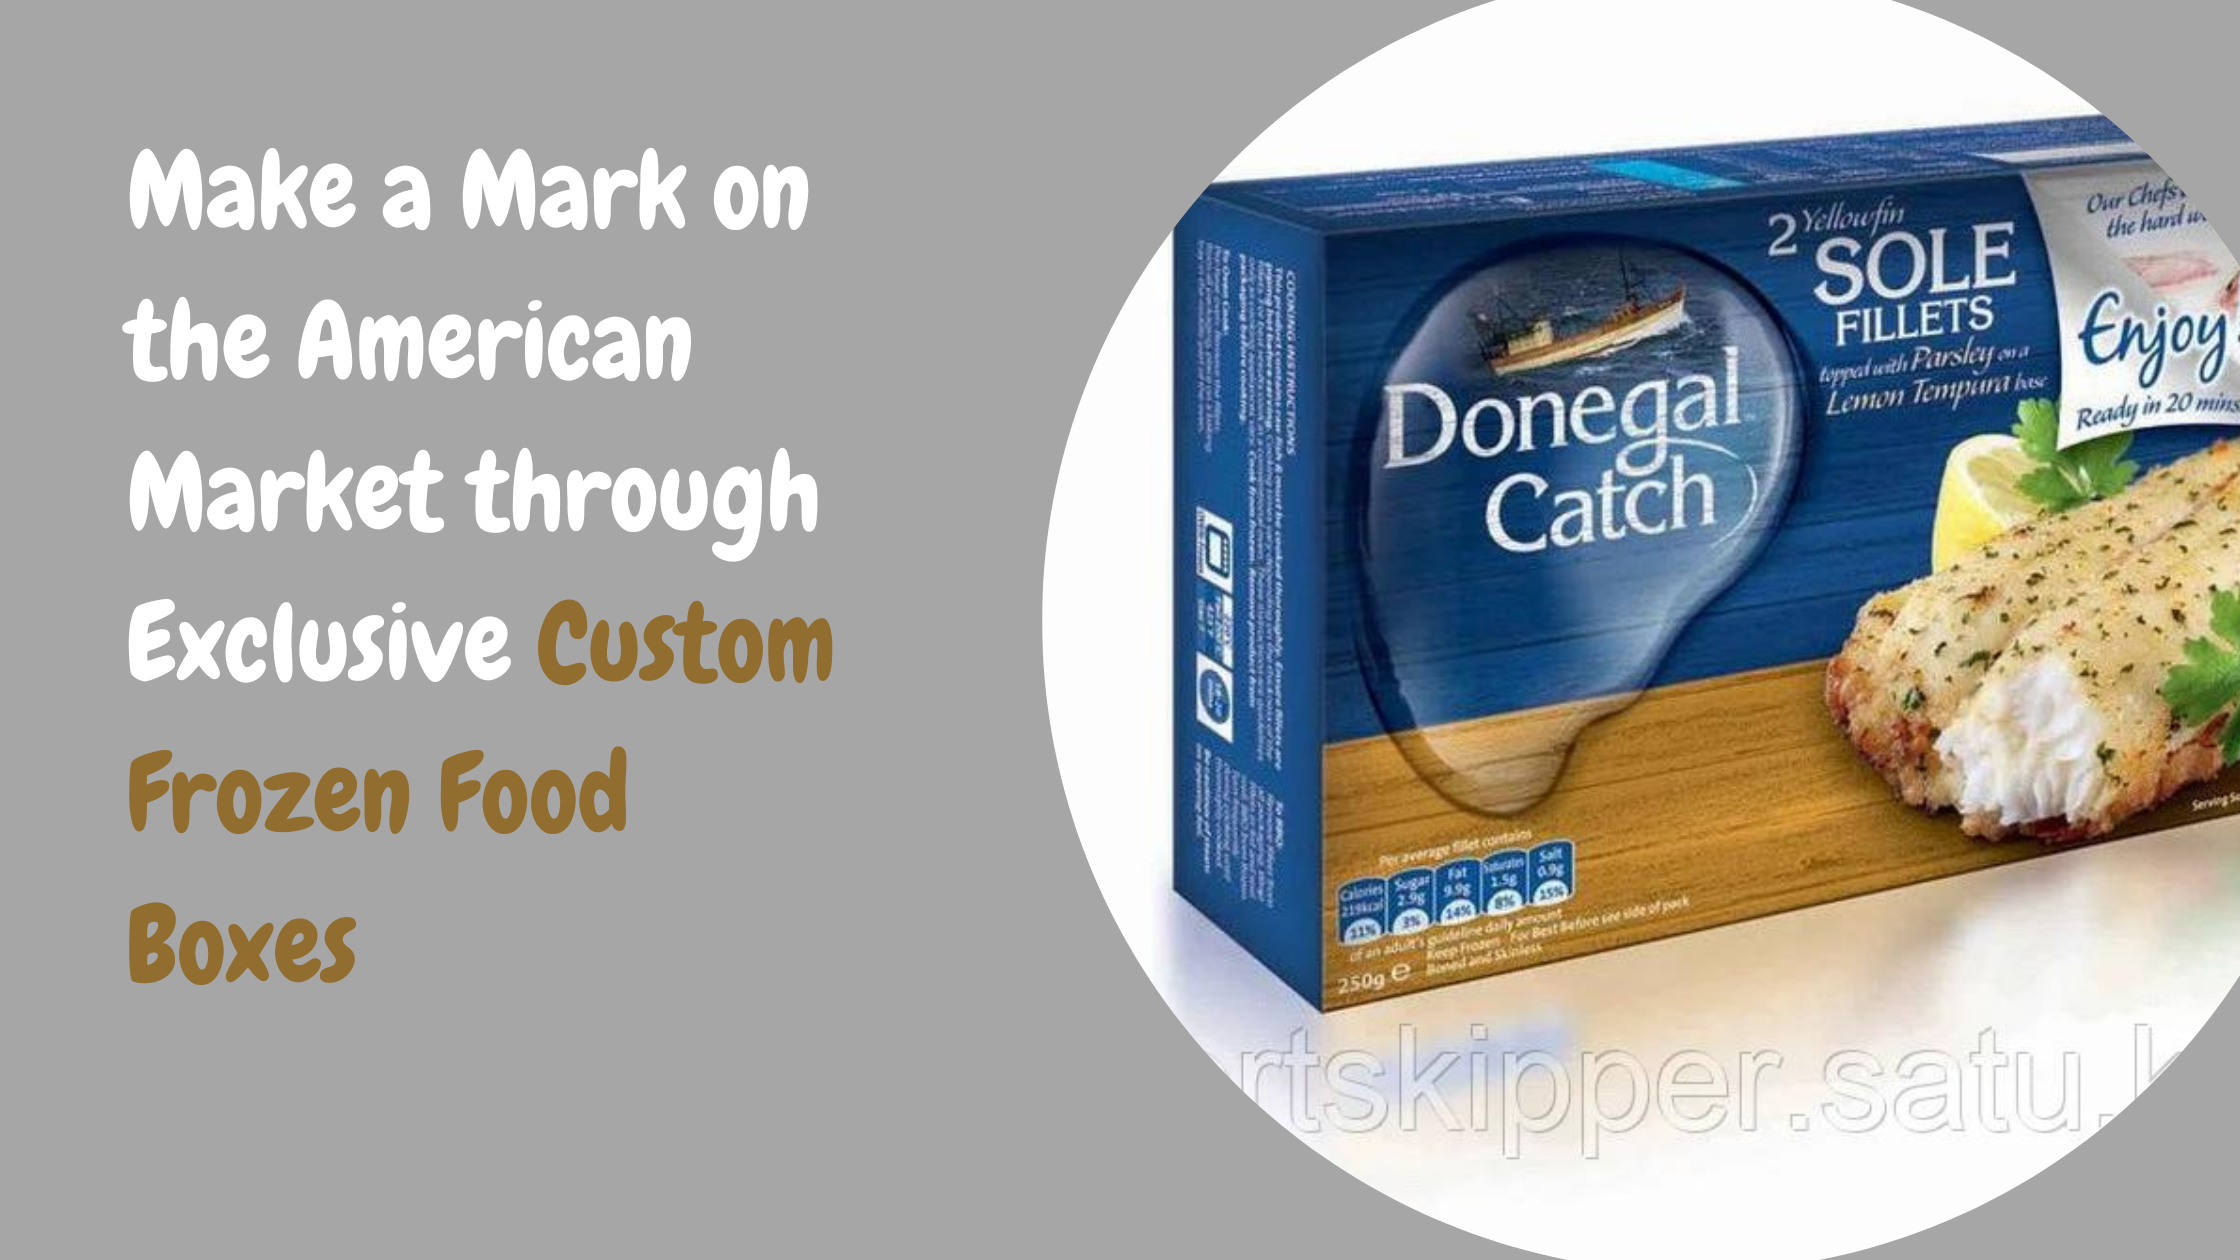 Make a Mark on the American Market through Exclusive Custom Frozen Food Boxes